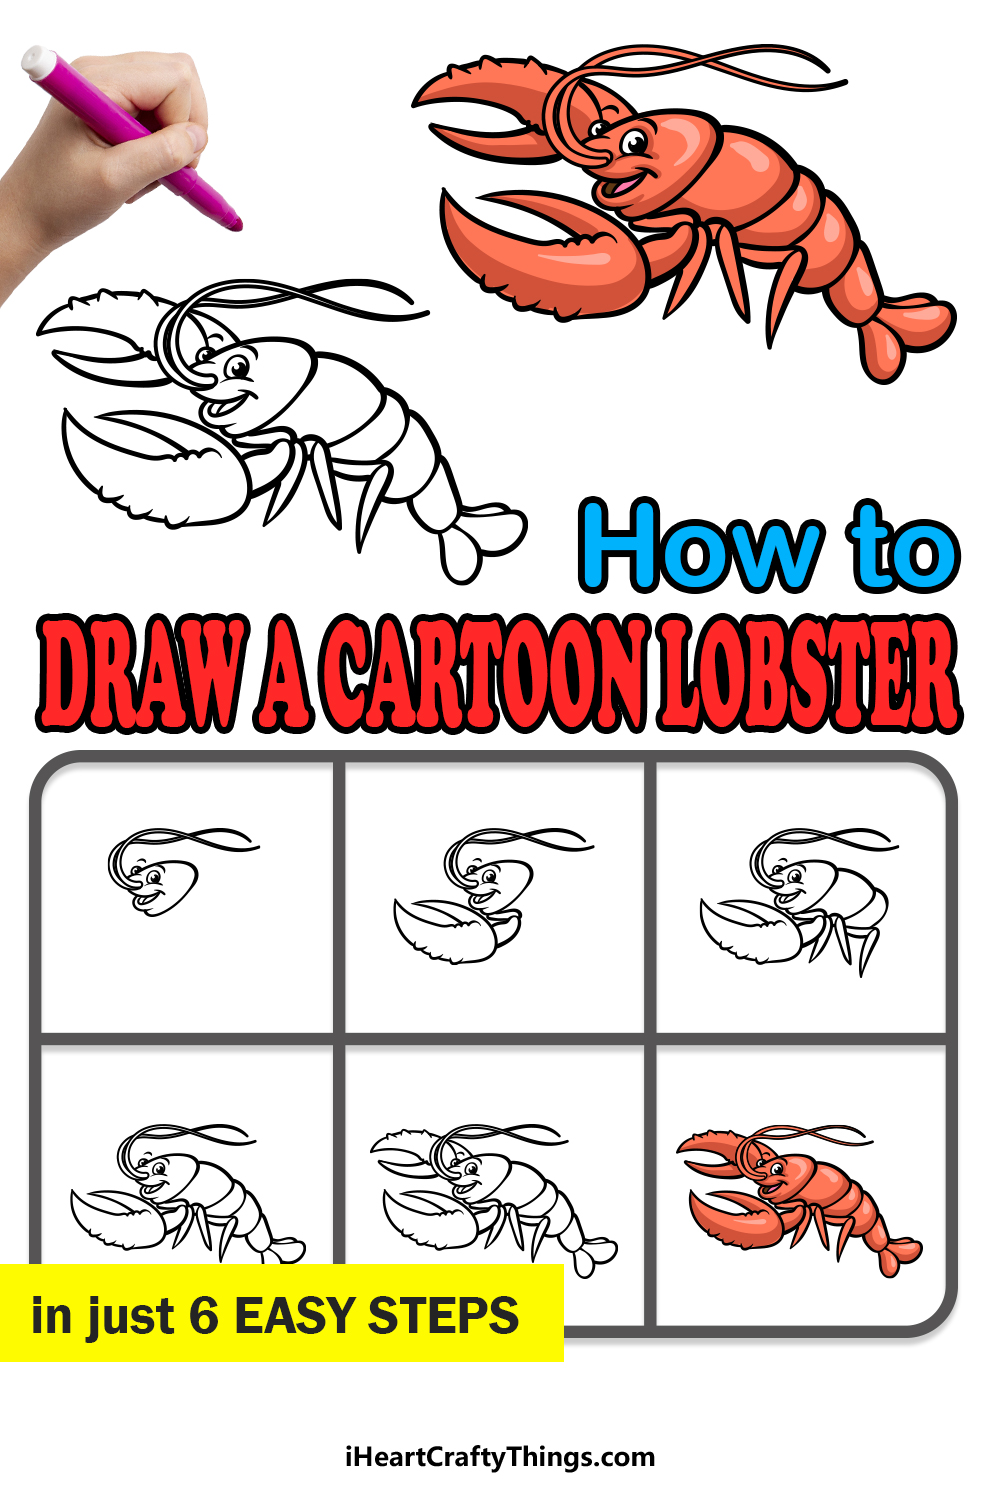 how to draw a cartoon lobster in 6 easy steps